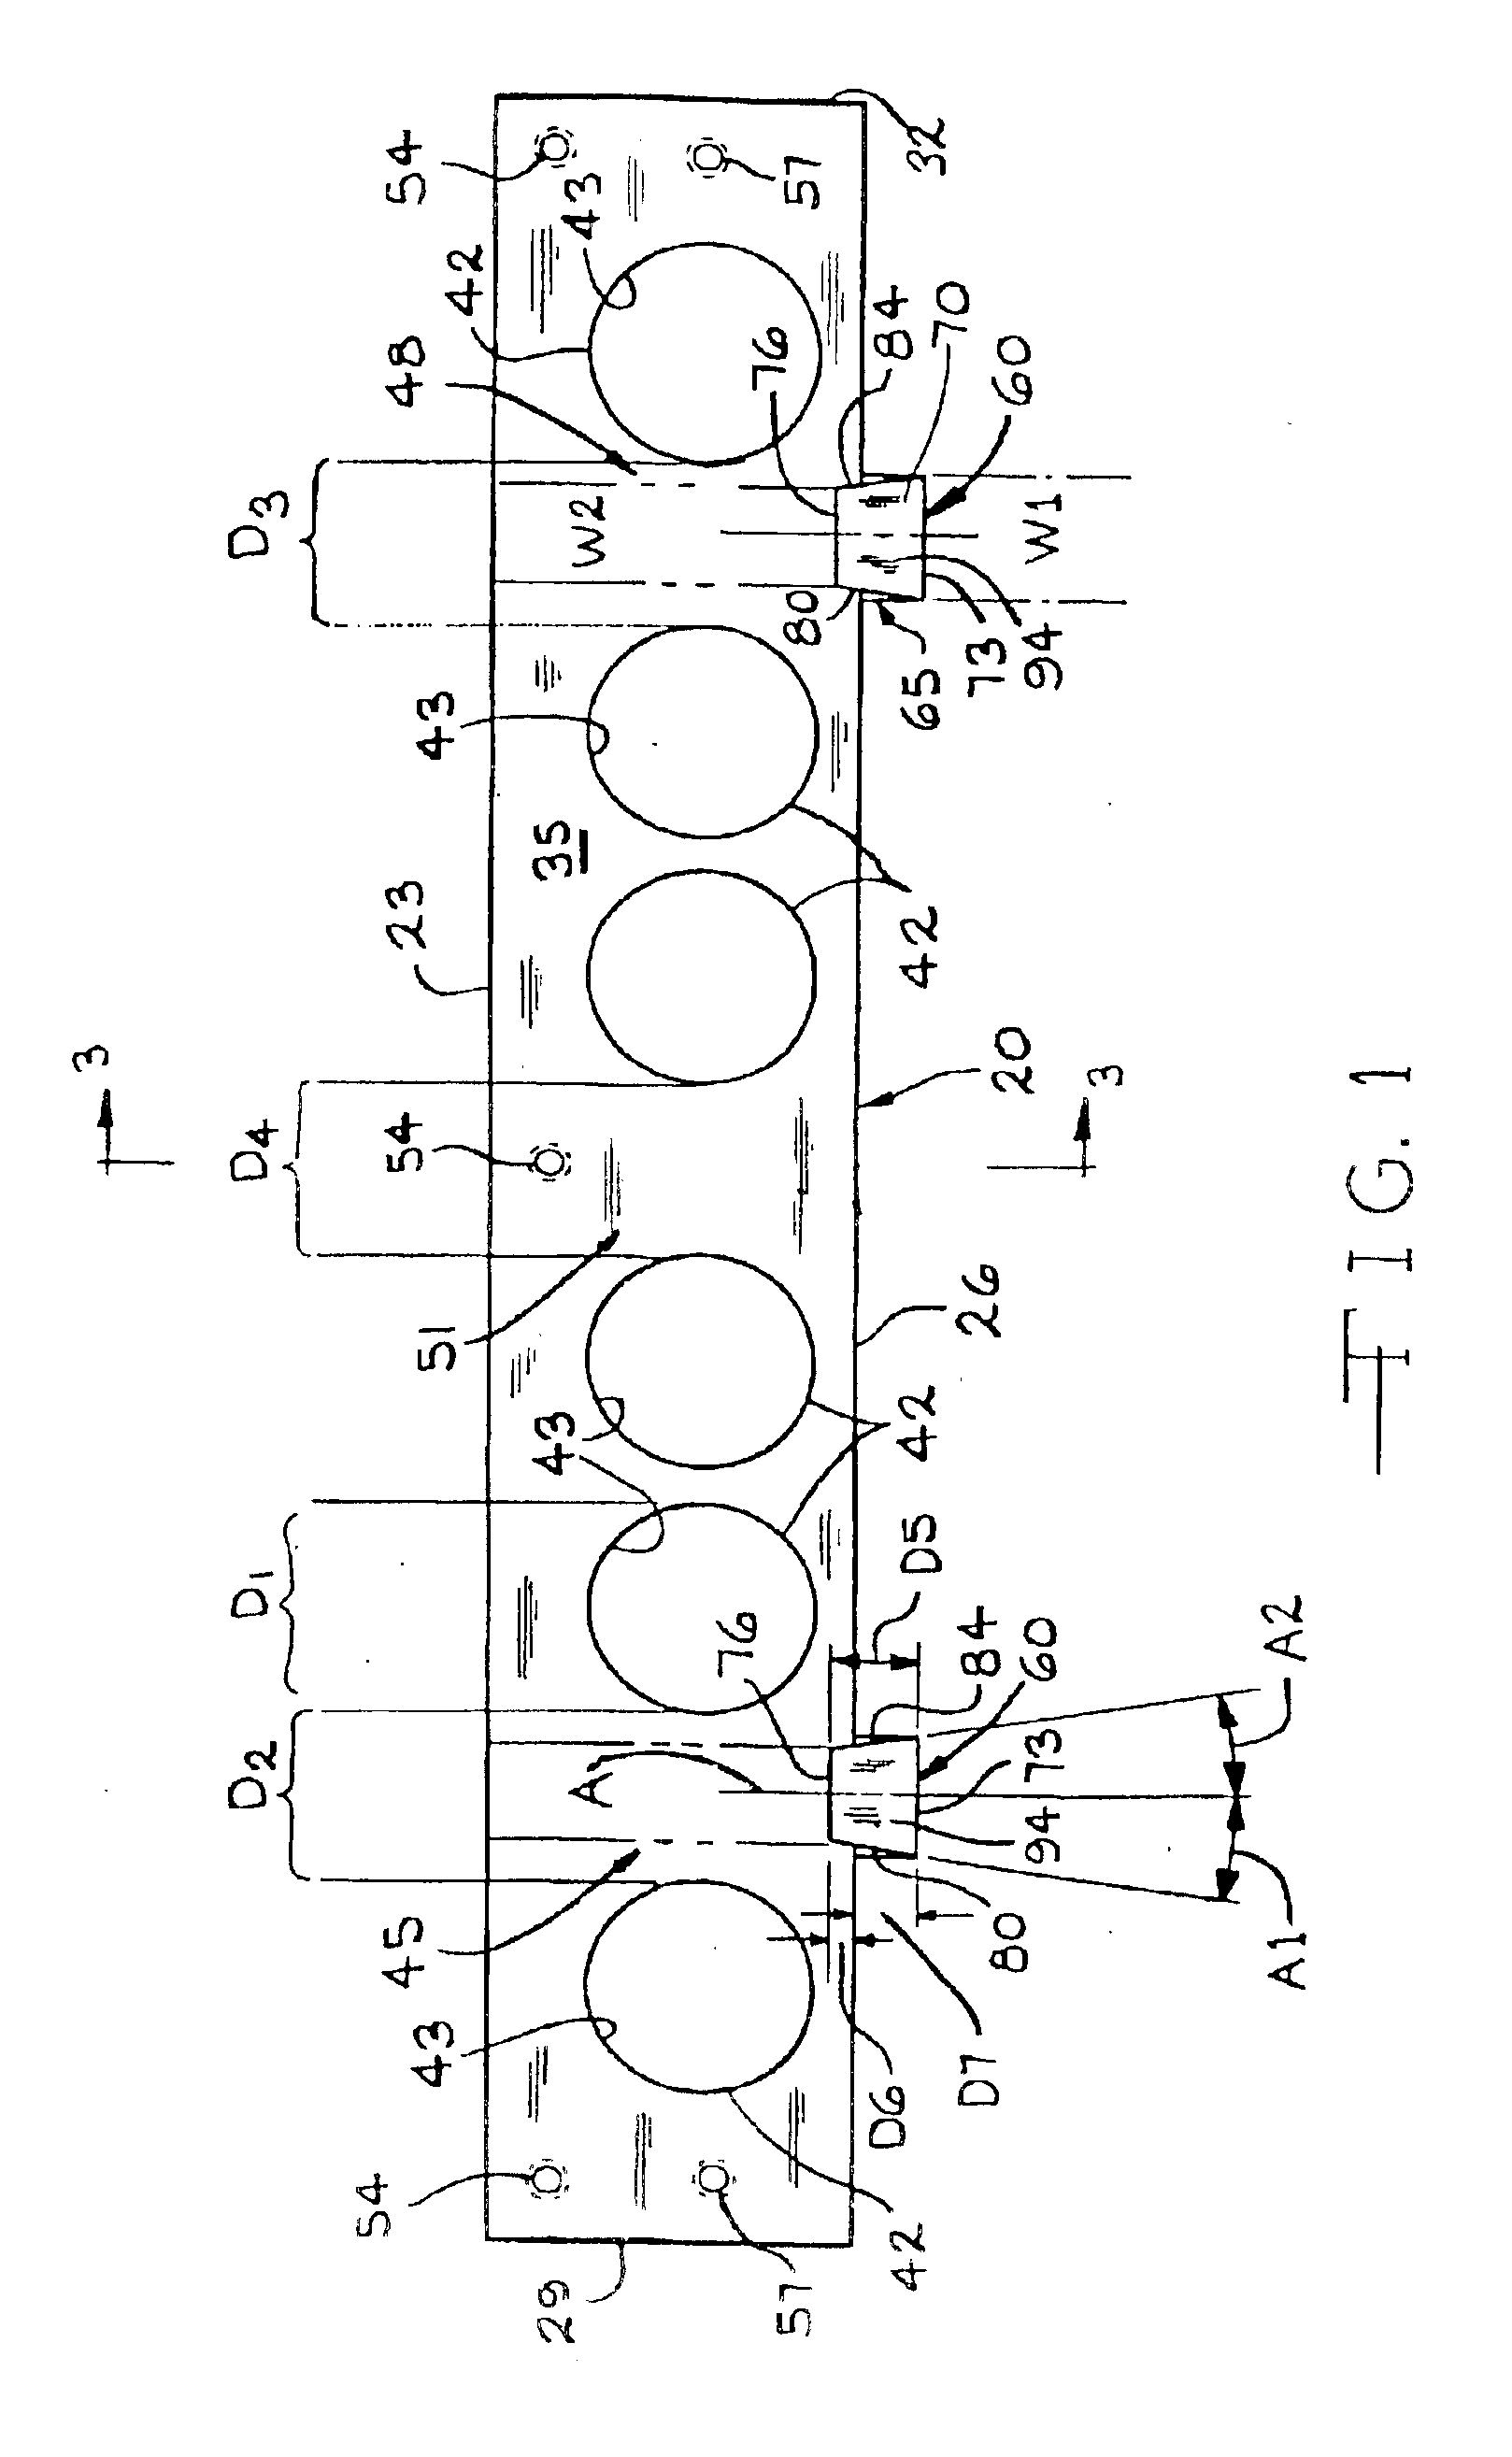 Mounting system for an air intake manifold assembly